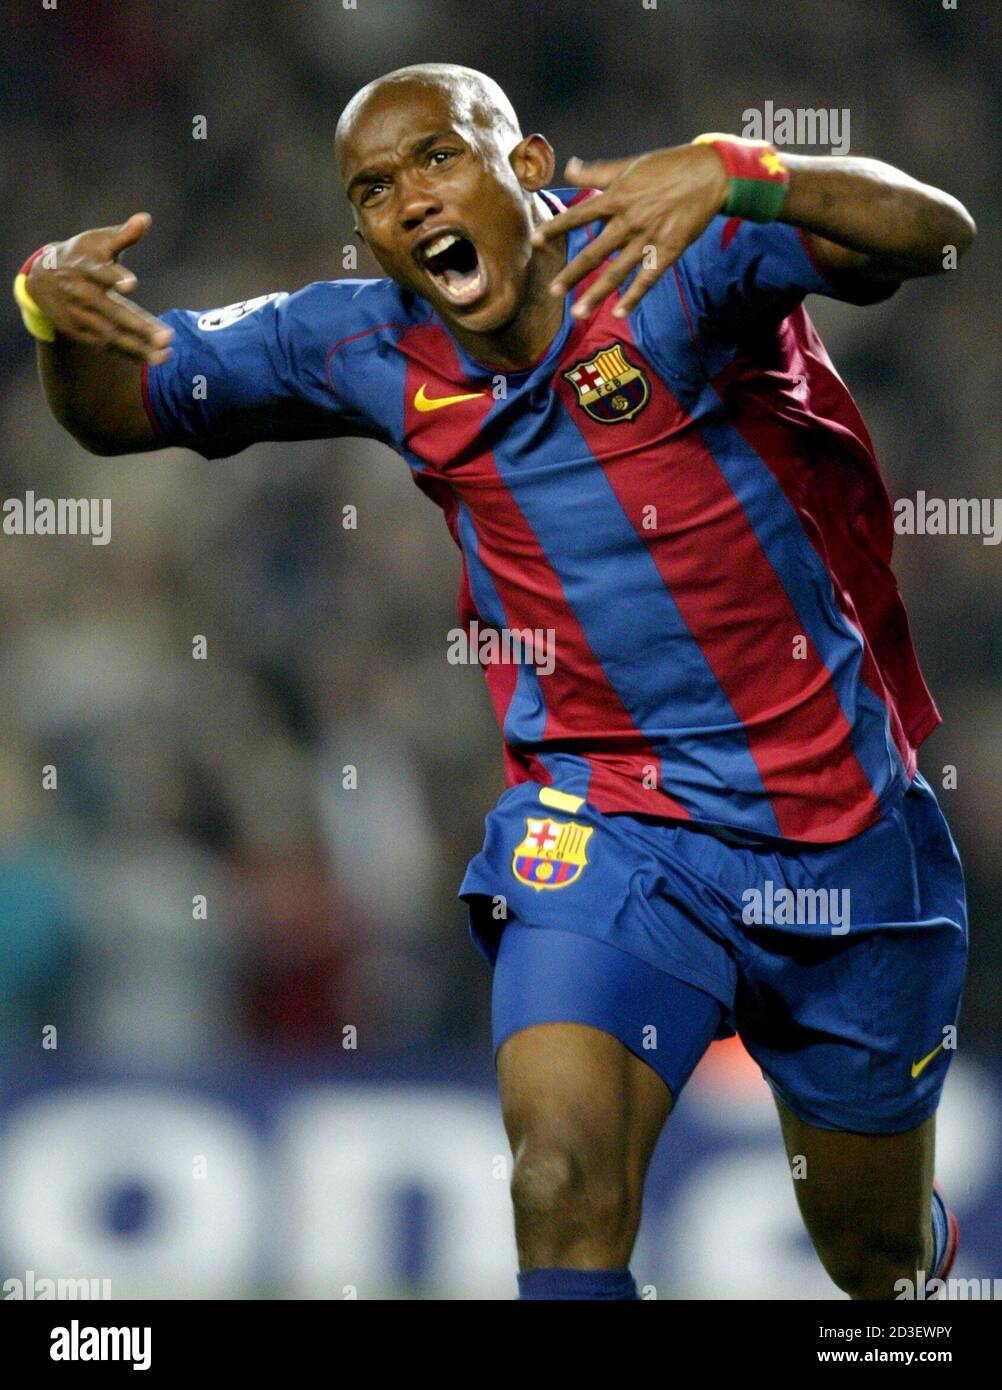 Barcelona S Eto O Celebrates Scoring A Goal Against Chelsea During Their Champions League First Knock Out Round First Leg Match In Barcelona Barcelona S Samuel Eto O Celebrates Scoring A Goal Against Chelsea During Their Champions